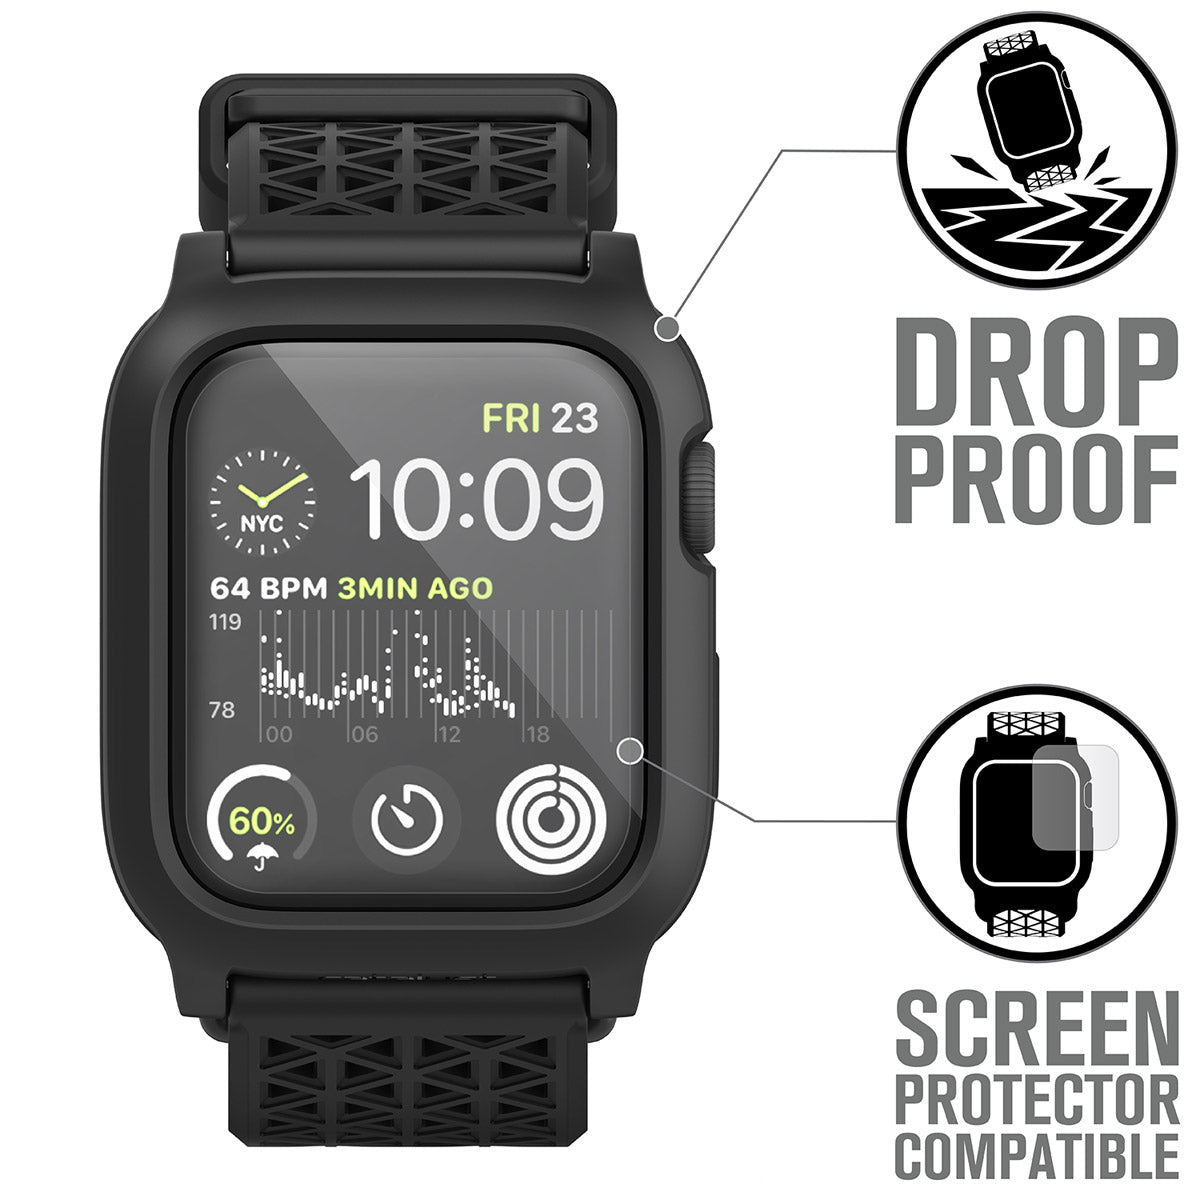 catalyst apple watch series 6 5 4 se gen 21 44mm 40mm impact protection case sport band showing drop proof and screen protector comaptibility text reads drop proof screen protector compatible